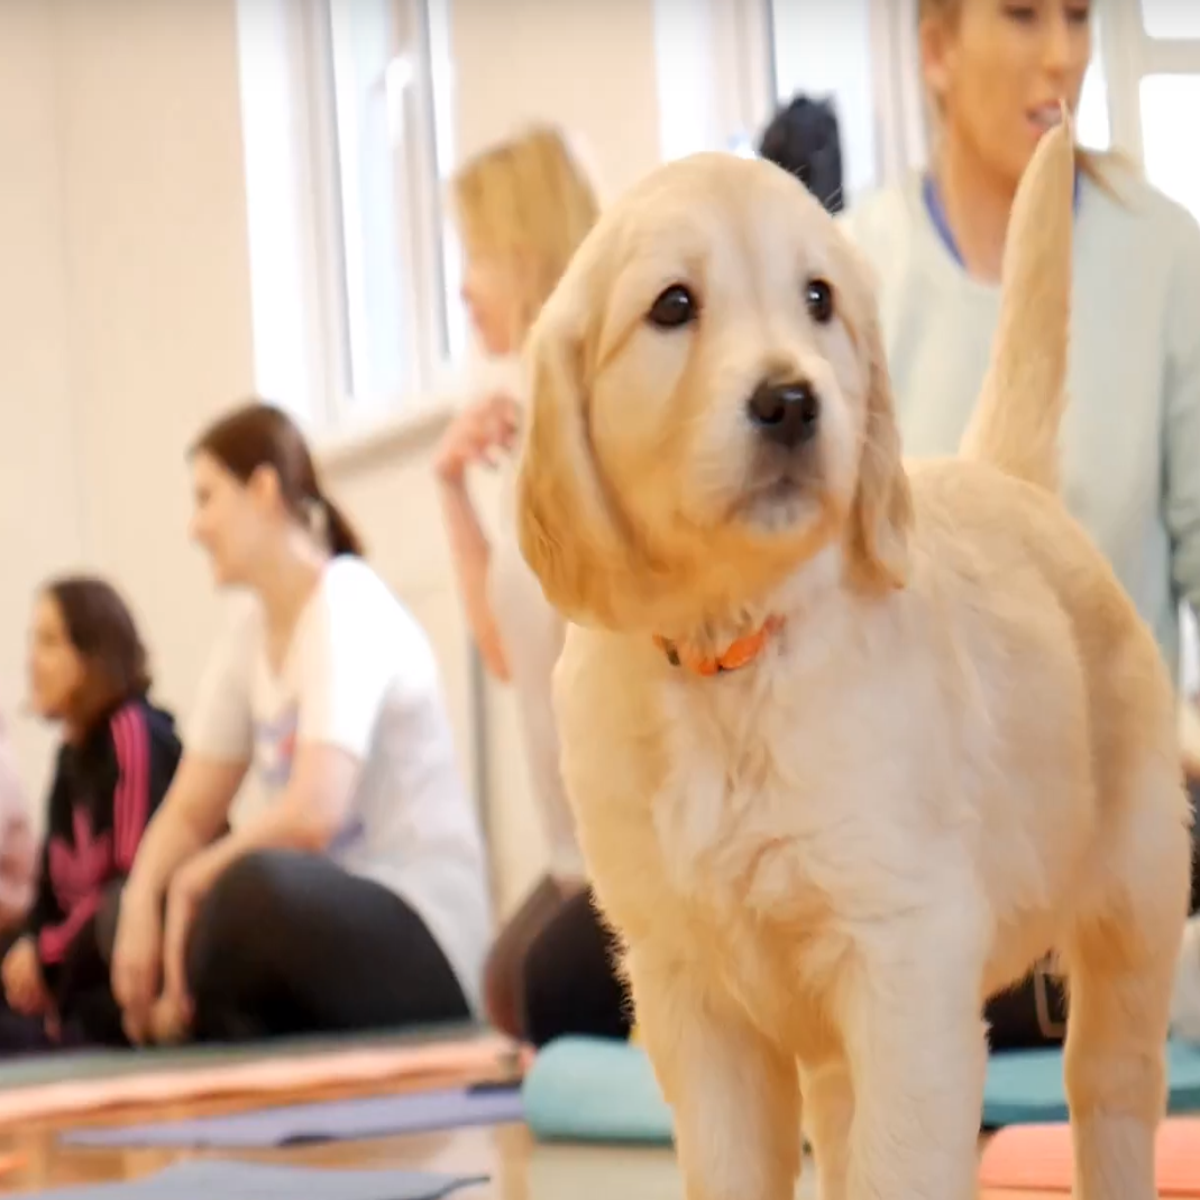 Which animal yoga classes are worth the money? We tried 5 kinds, with mixed  reviews.